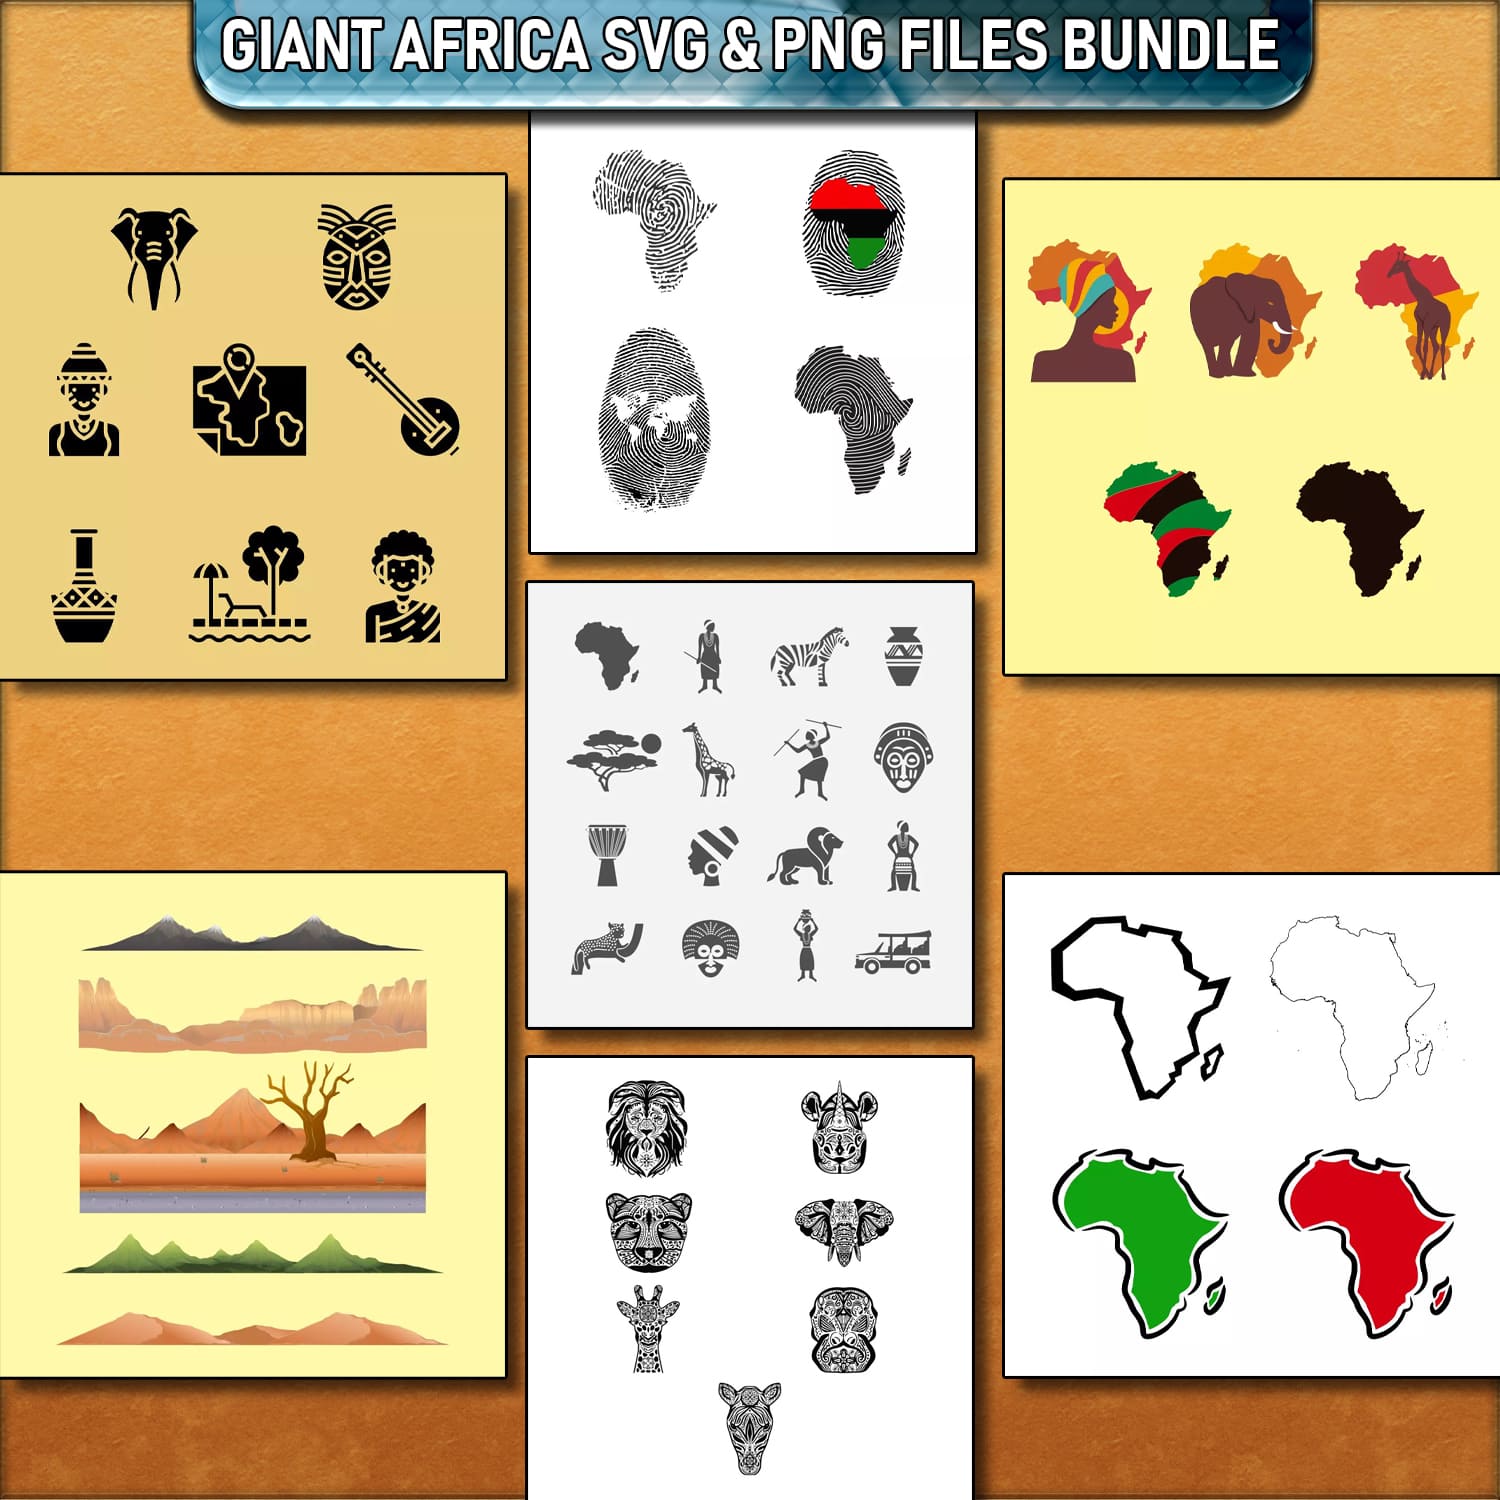 Giant Africa SVG PNG Files Bundle cover image.